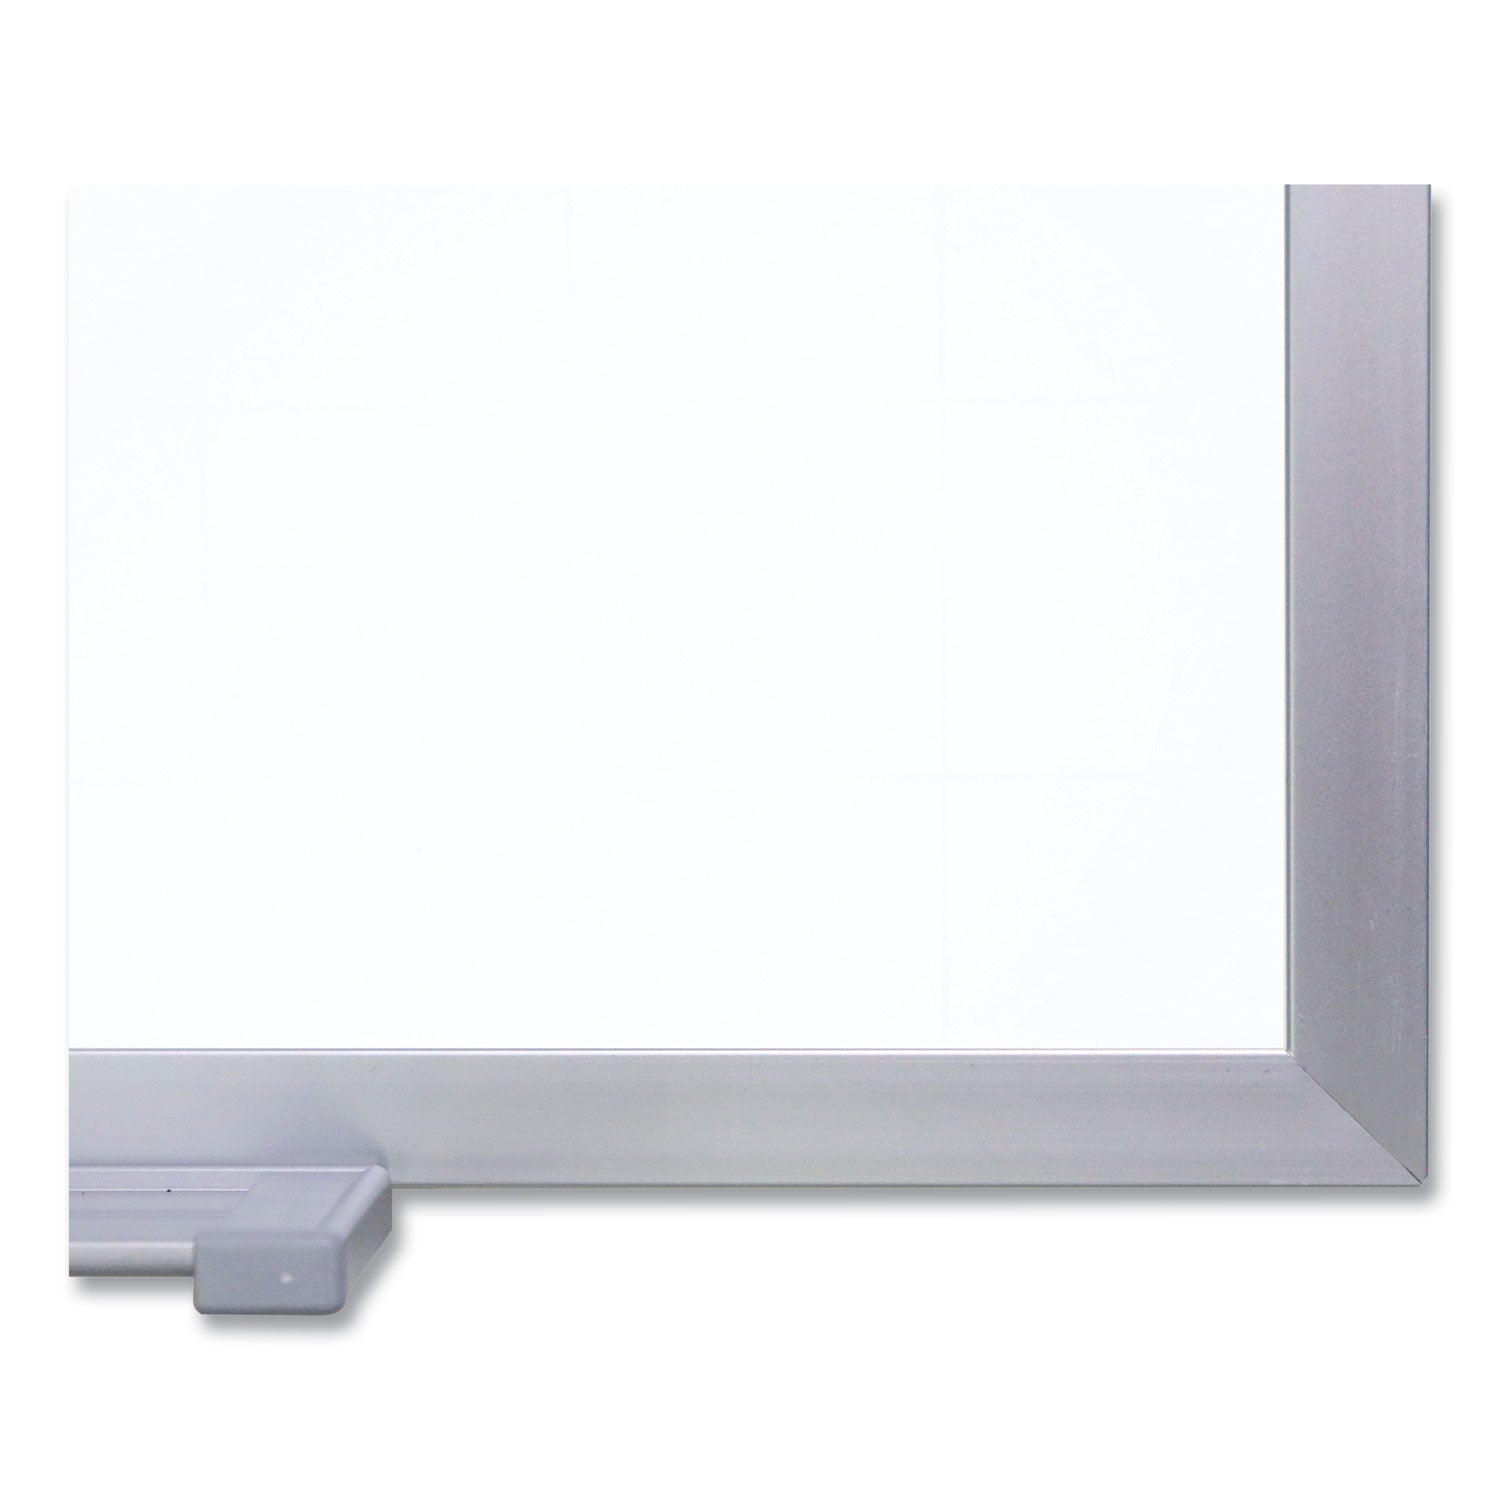 magnetic-porcelain-whiteboard-with-satin-aluminum-frame-1205-x-485-white-surface-ships-in-7-10-business-days_ghem14104 - 3